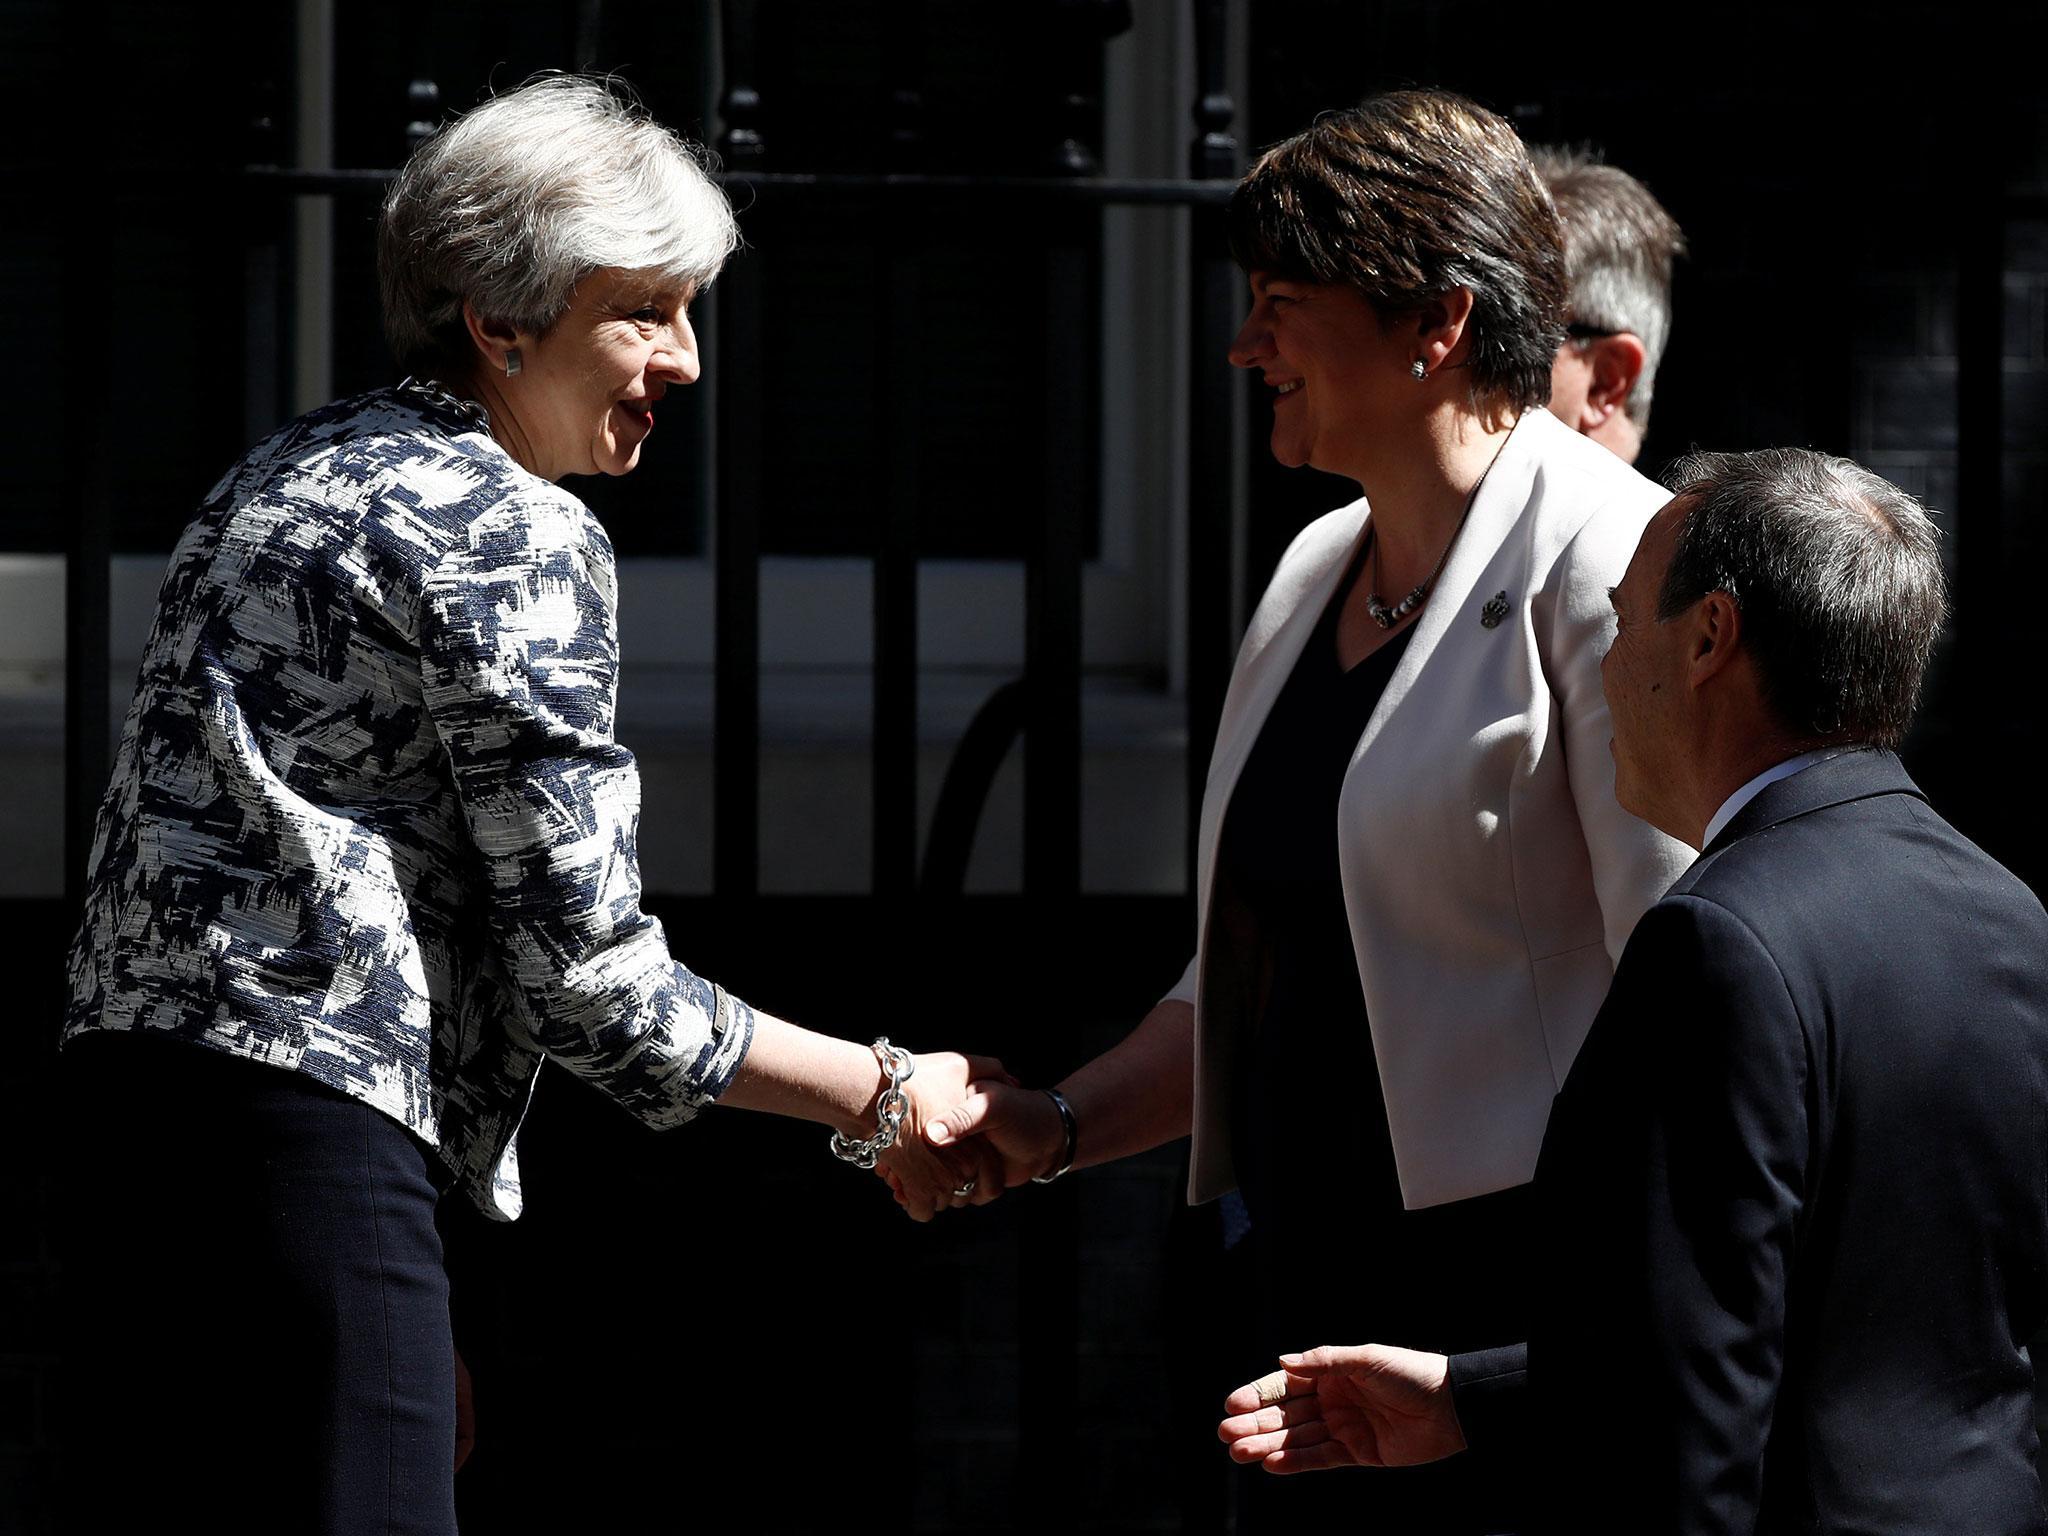 Theresa May greets Arlene Foster, the DUP leader, after they agreed the 'cash-for-votes' deal